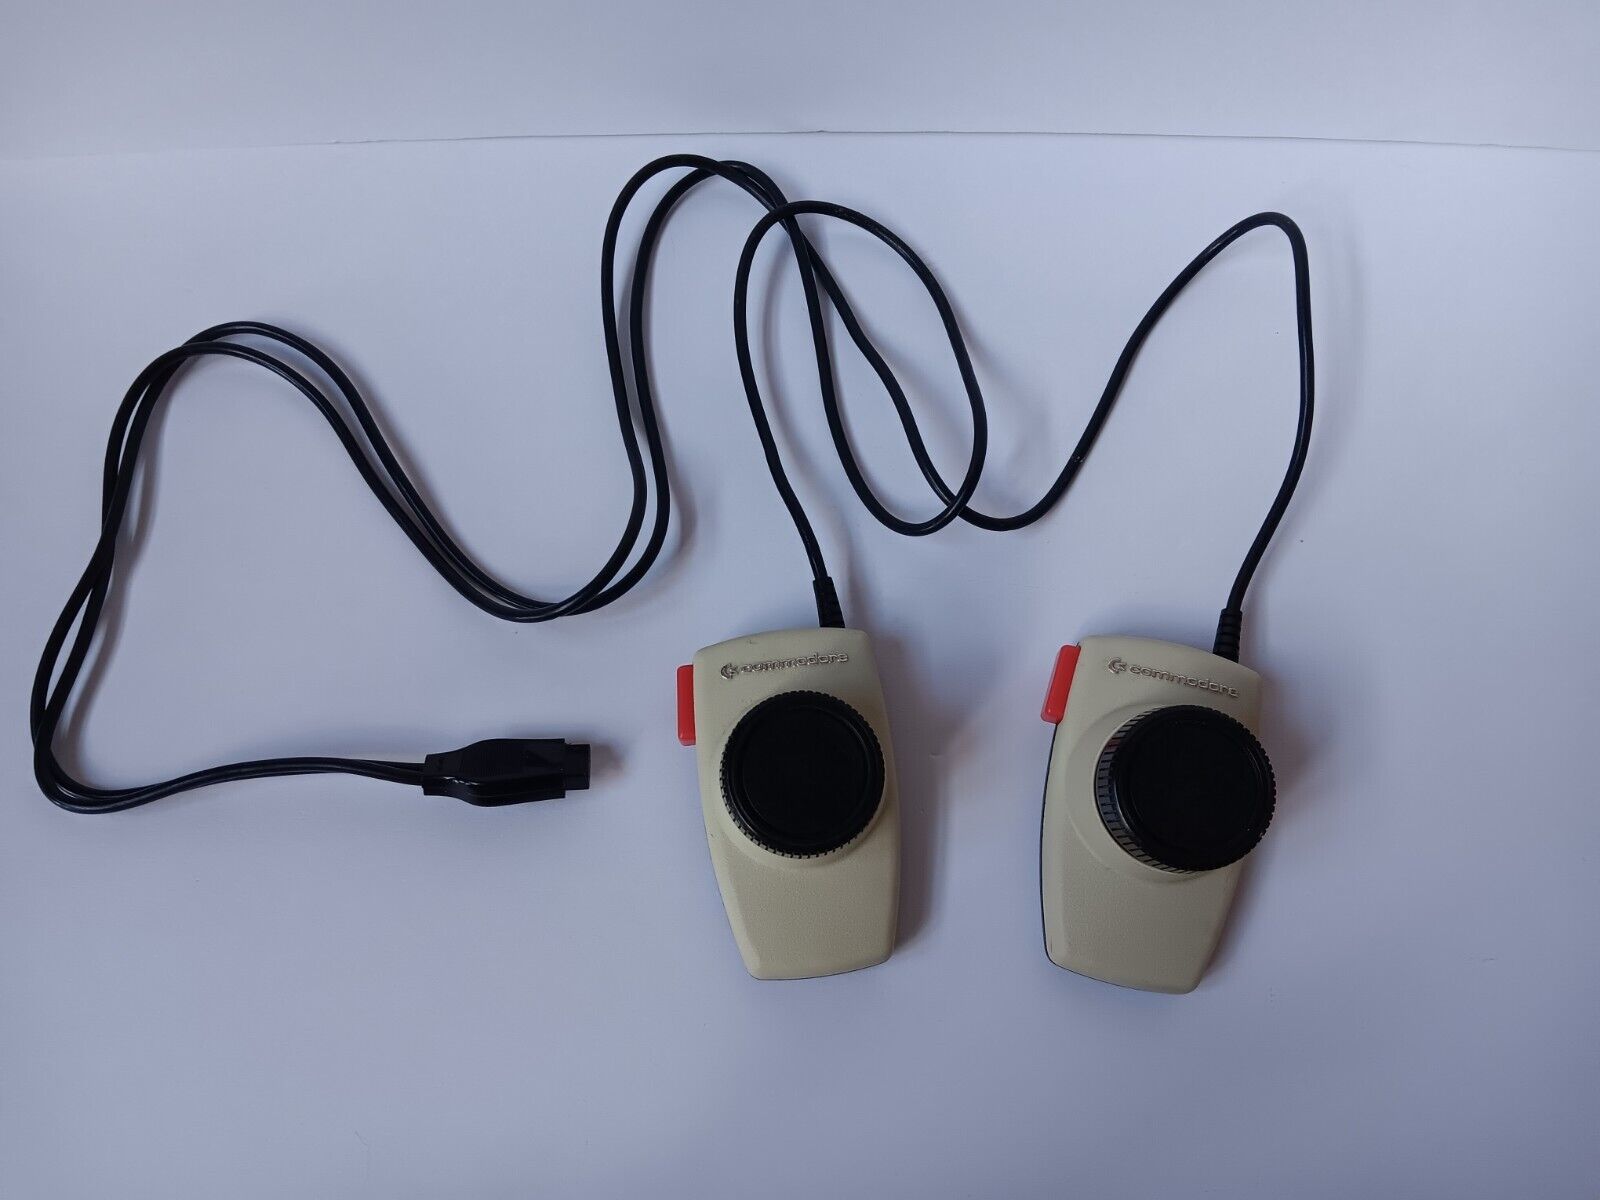 Pair of Commdore 64 Paddles Game Controllers VIC-1312 Tested/Works